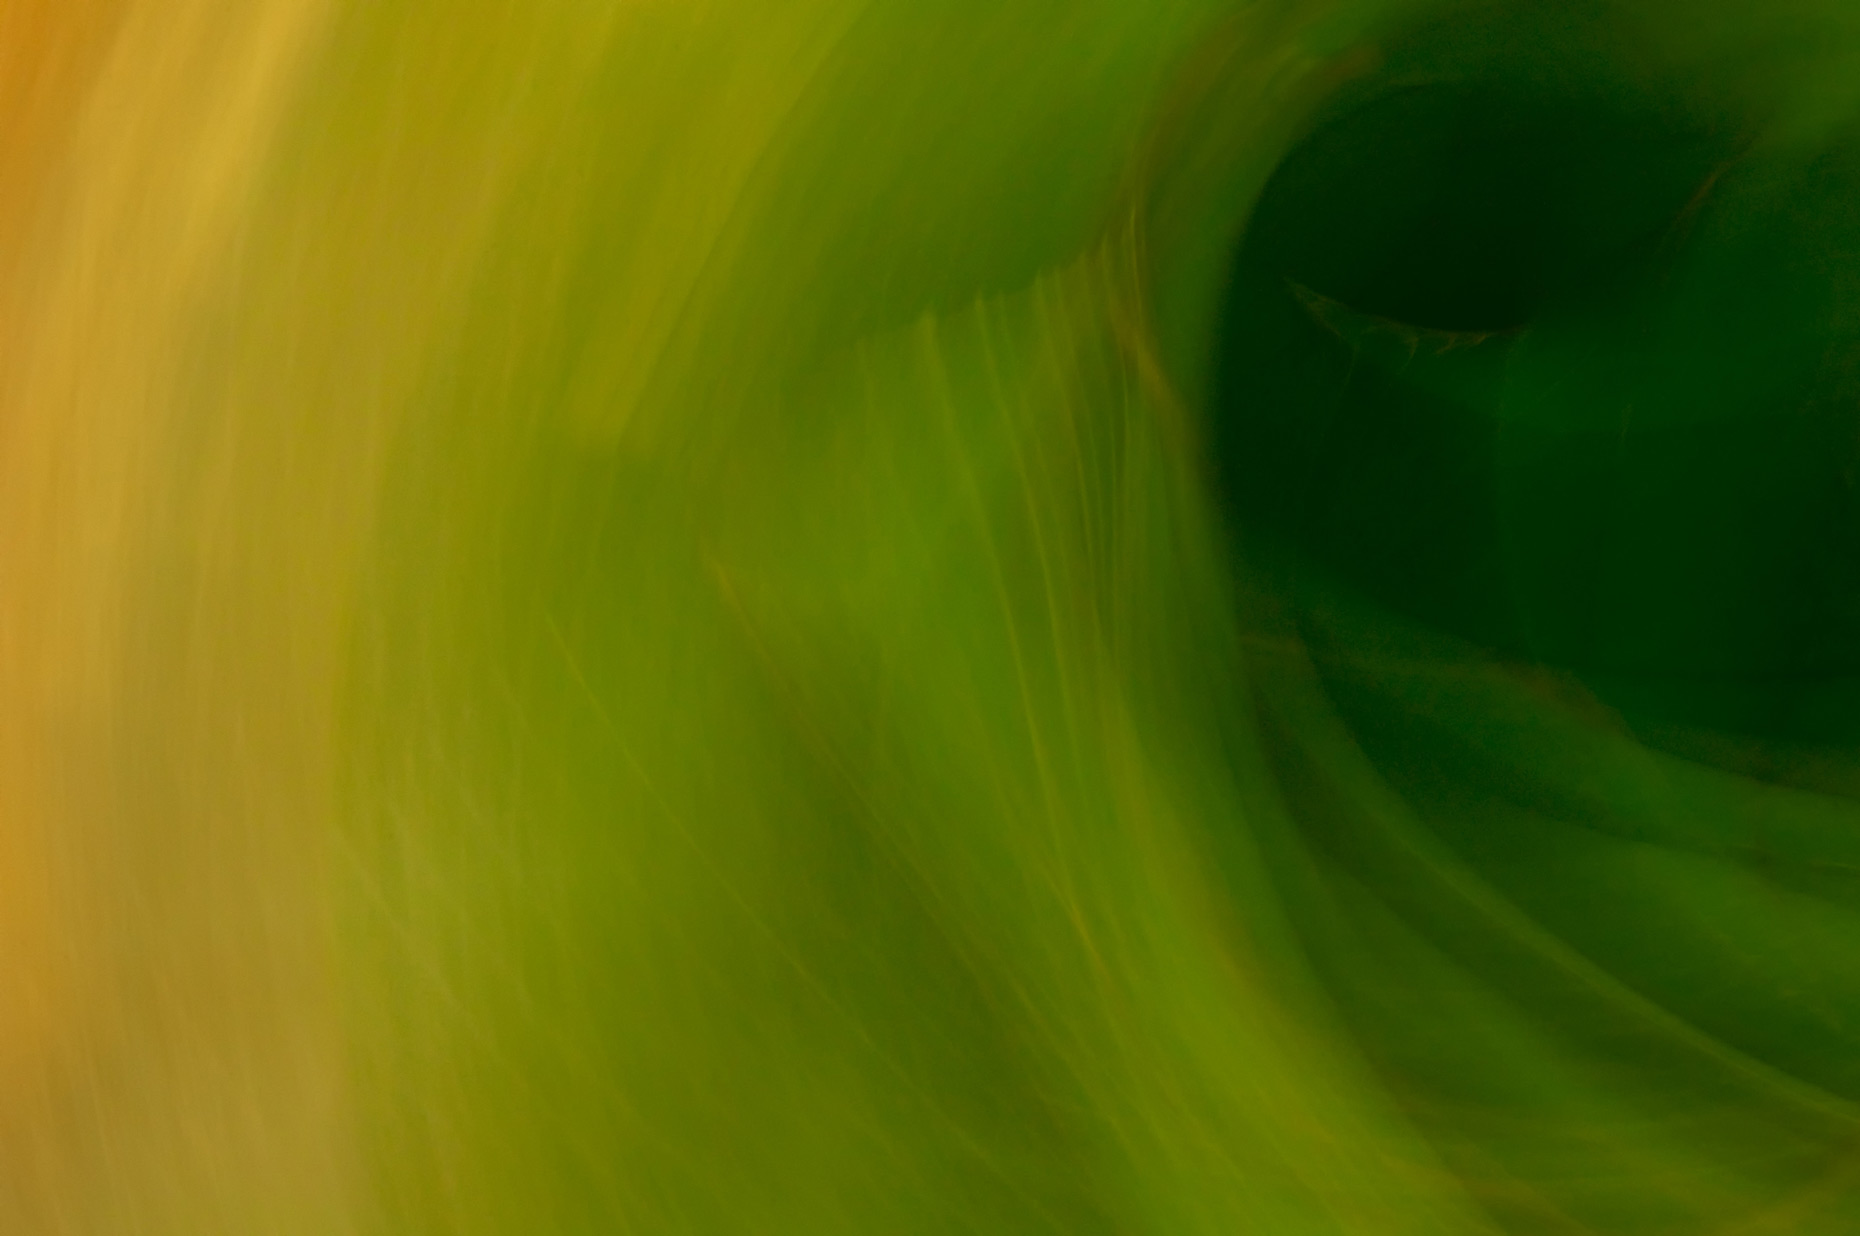 Abstract-Art-Green-Riding-the-Wave-Laria-Saunders.jpg